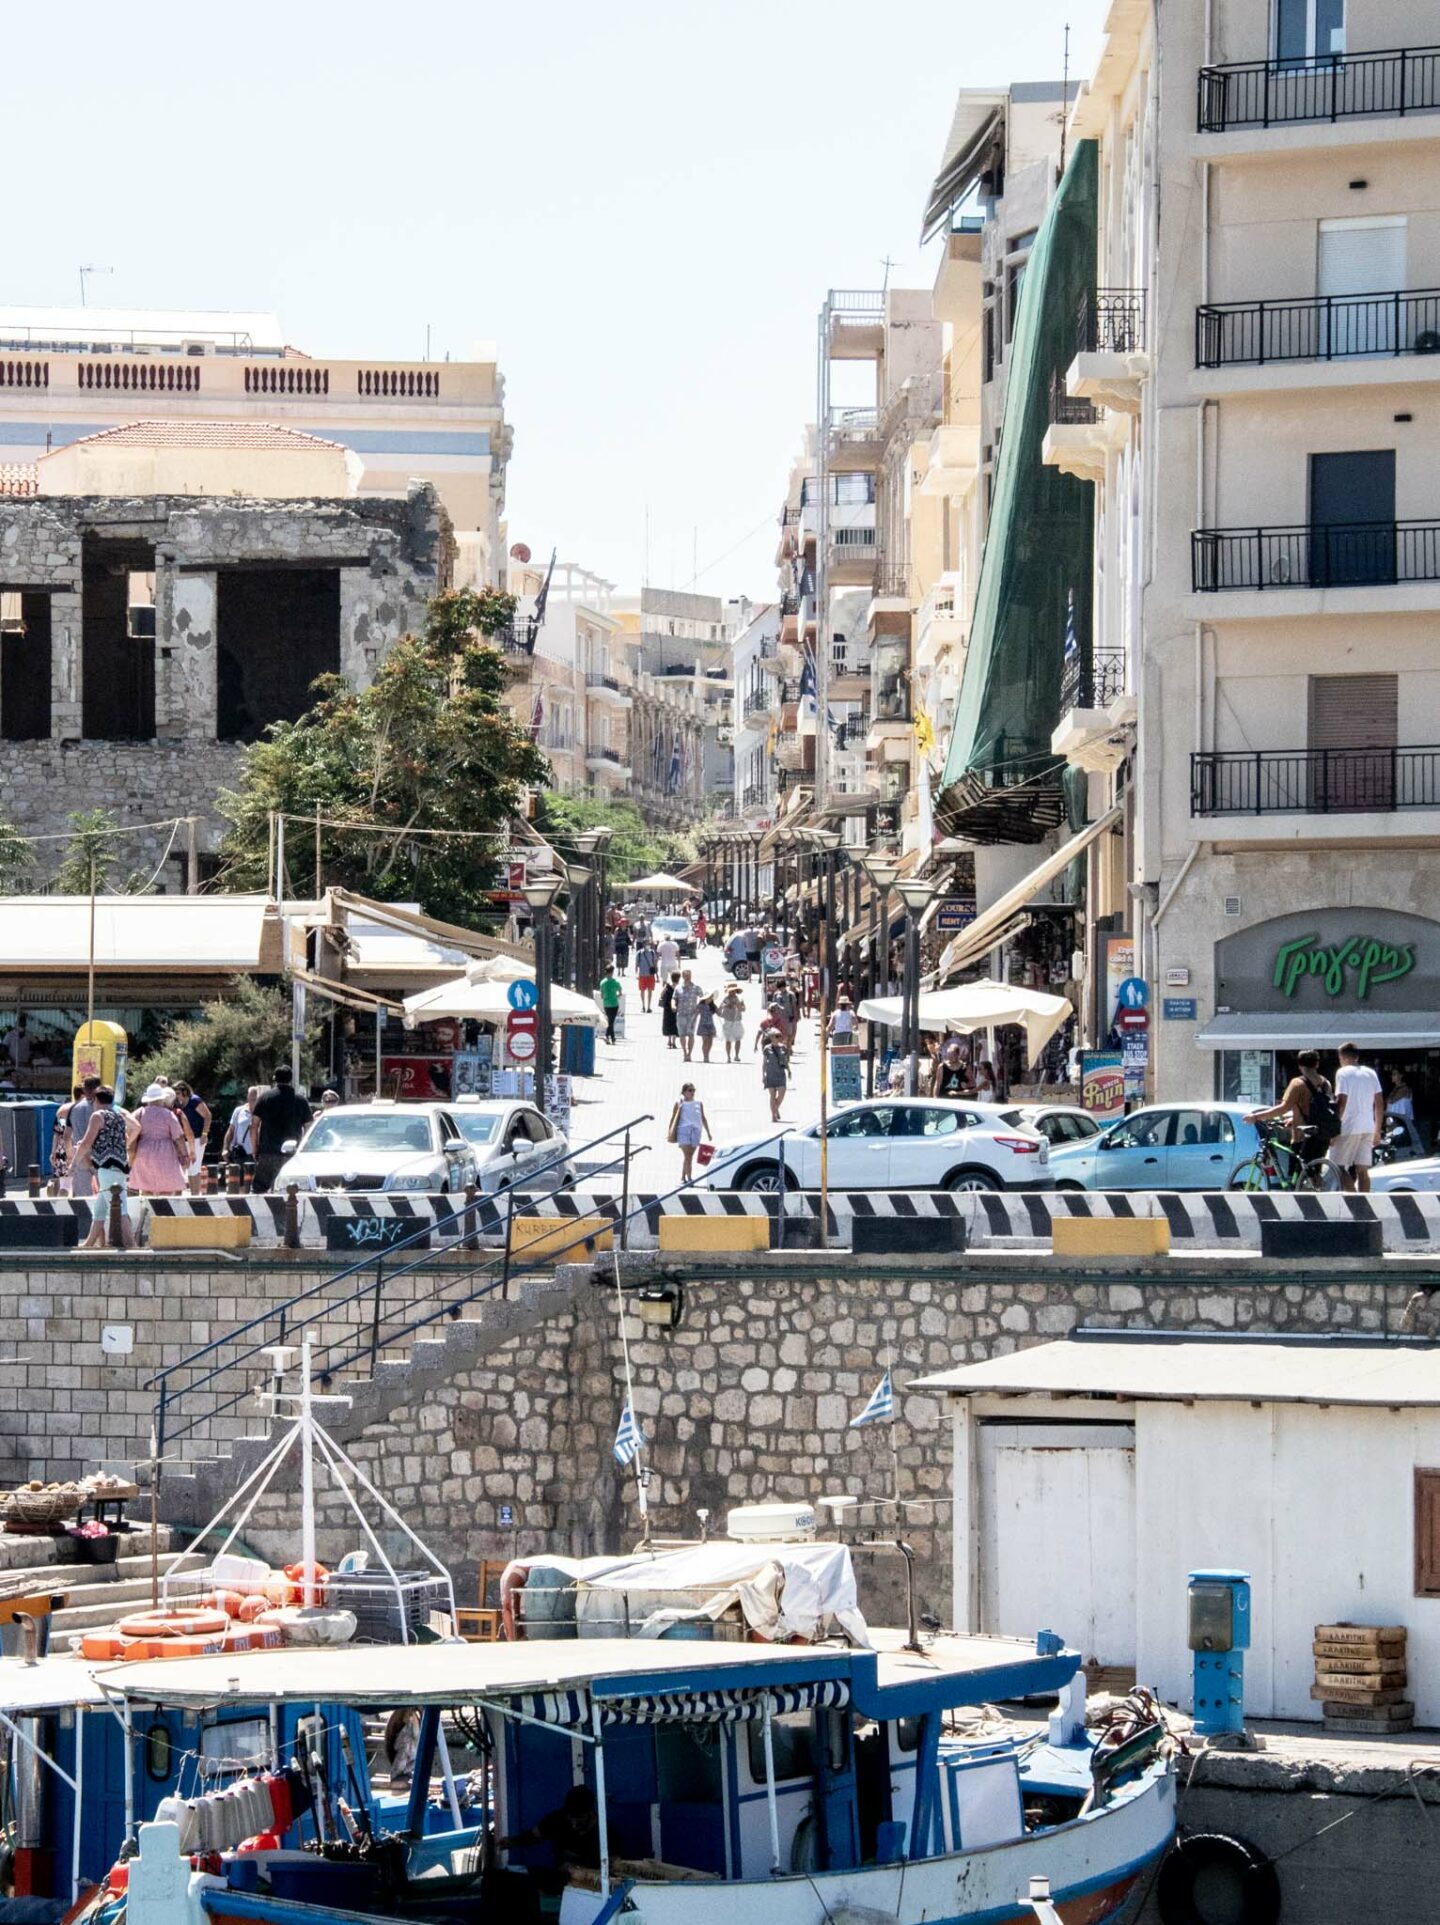 A view of August 25th Street from Heraklion Harbour.